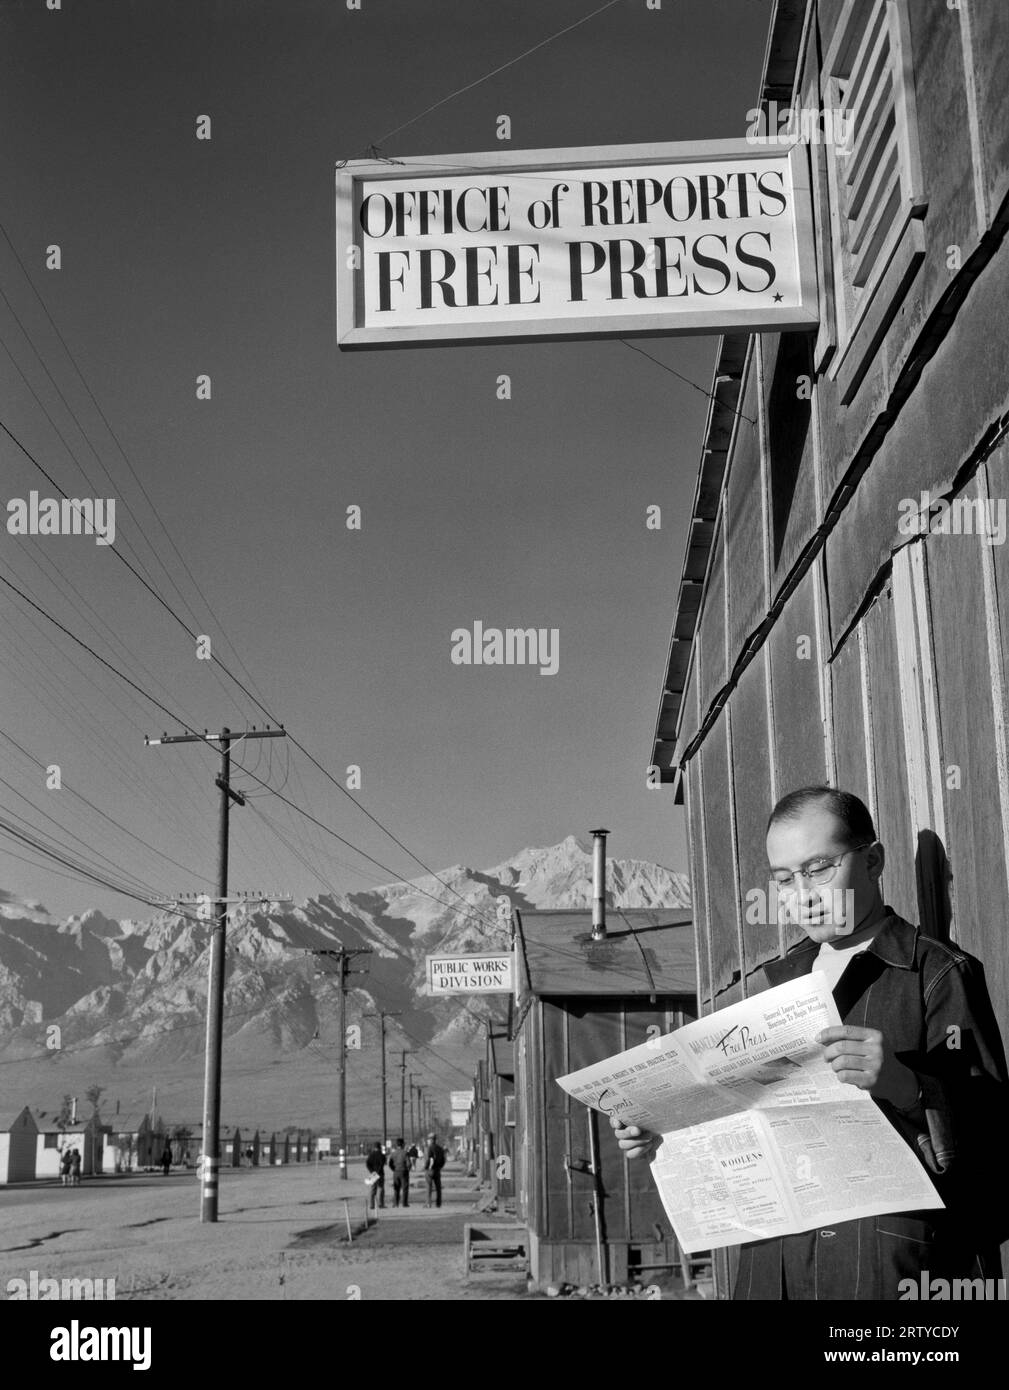 Owens Valley, California     1943 Editor Roy Takeno reading a copy of the Manzanar Free Press in front of the newspaper office at the Manzanar War Relocation Center in Owens Valley, California. The Manzanar Free Press was first launched in April of 1942 by ex-journalists in what eventually became a relocation center for Japanese-Americans. The first issue, printed on July 22, 1942, stated: “We want to repeat again that the Free Press belongs to the people of Manzanar, that, instead of being merely the mouthpiece of the administration, it strives to express the opinions of the evacuees in the s Stock Photo